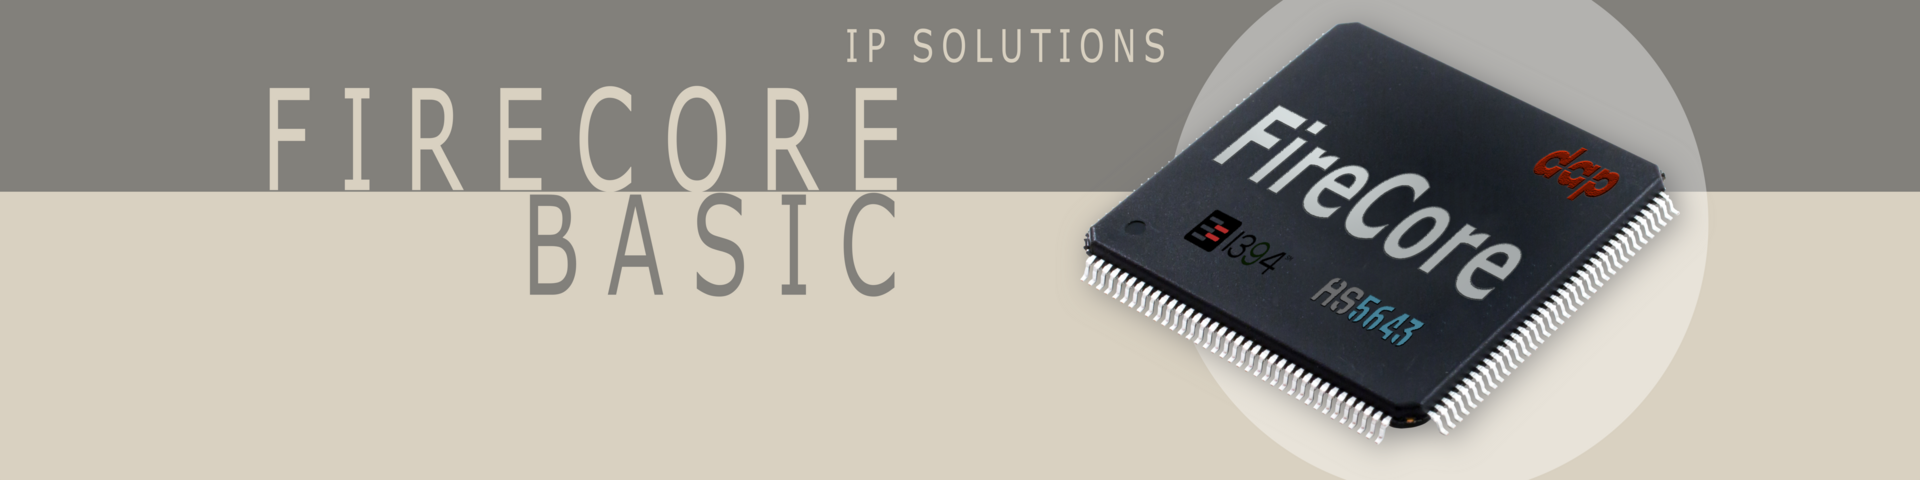 1394 and AS5643 IP Core solutions - FireCore Basic